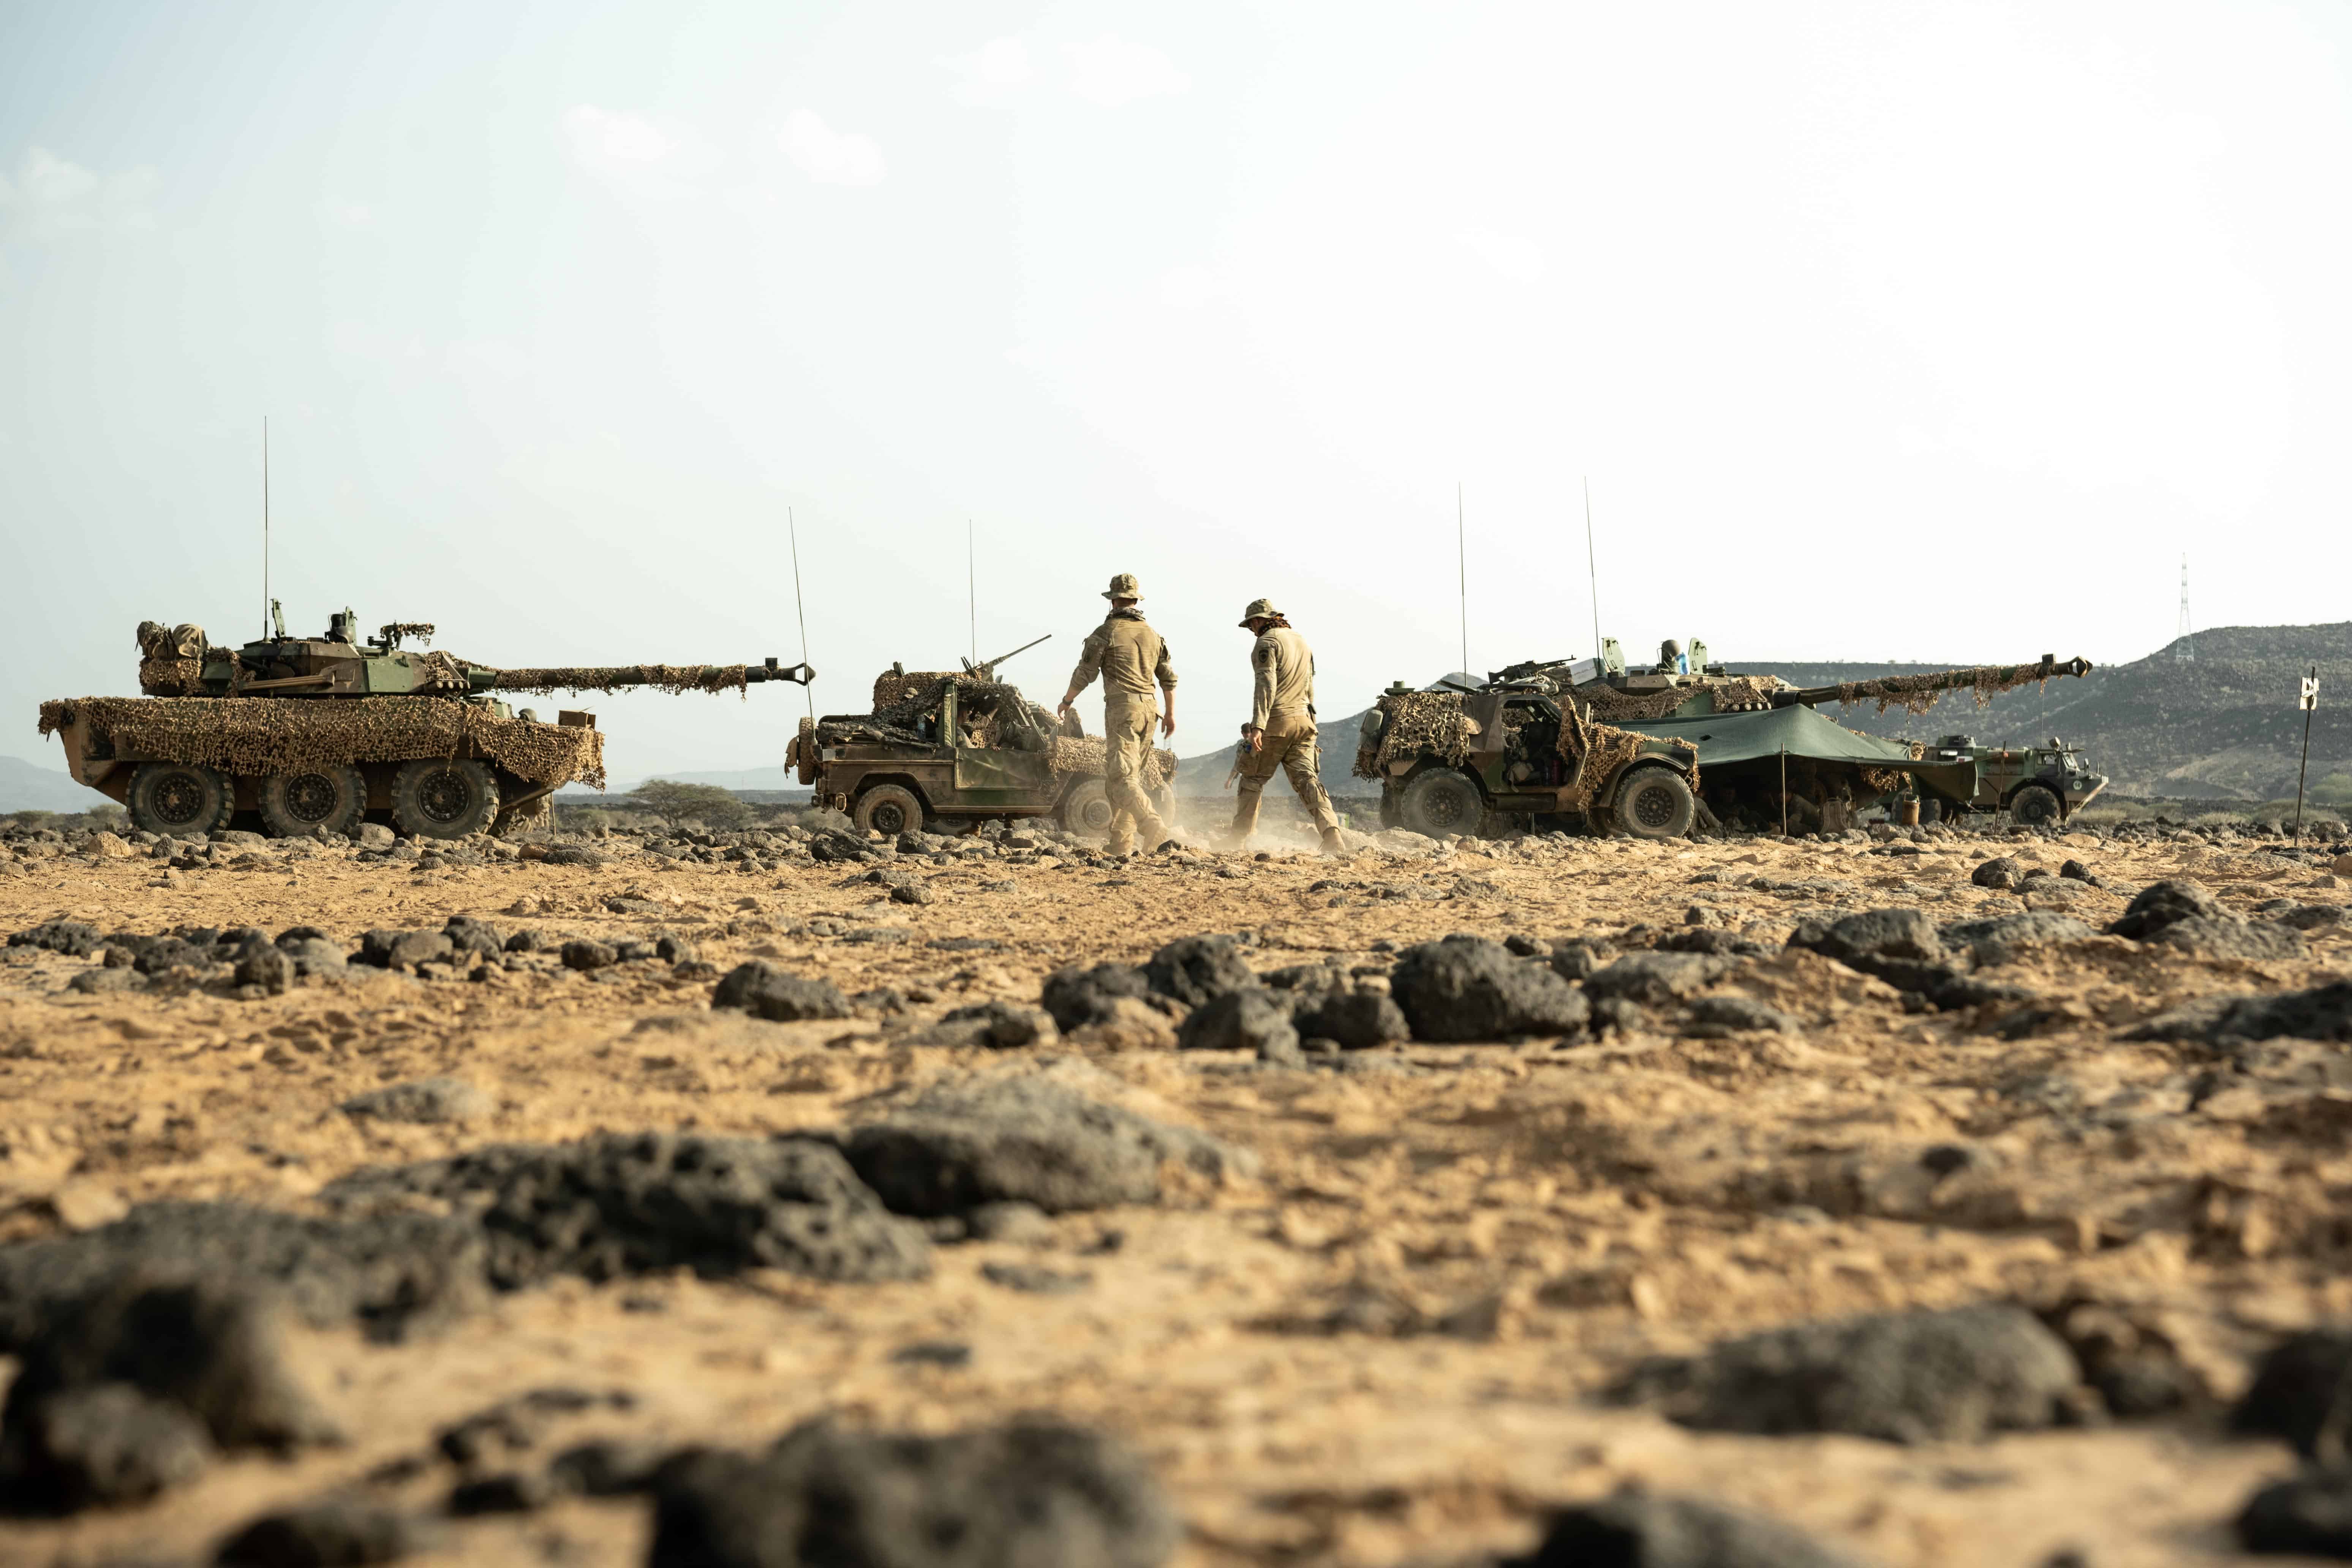 U.S. service members with Combined Joint Task Force - Horn of Africa walk among French tanks and lightweight tactical vehicles as part of the French Desert Commando Course (FDCC) at the Djiboutian Range Complex, Djibouti, Sept. 13, 2021. During FDCC, U.S.